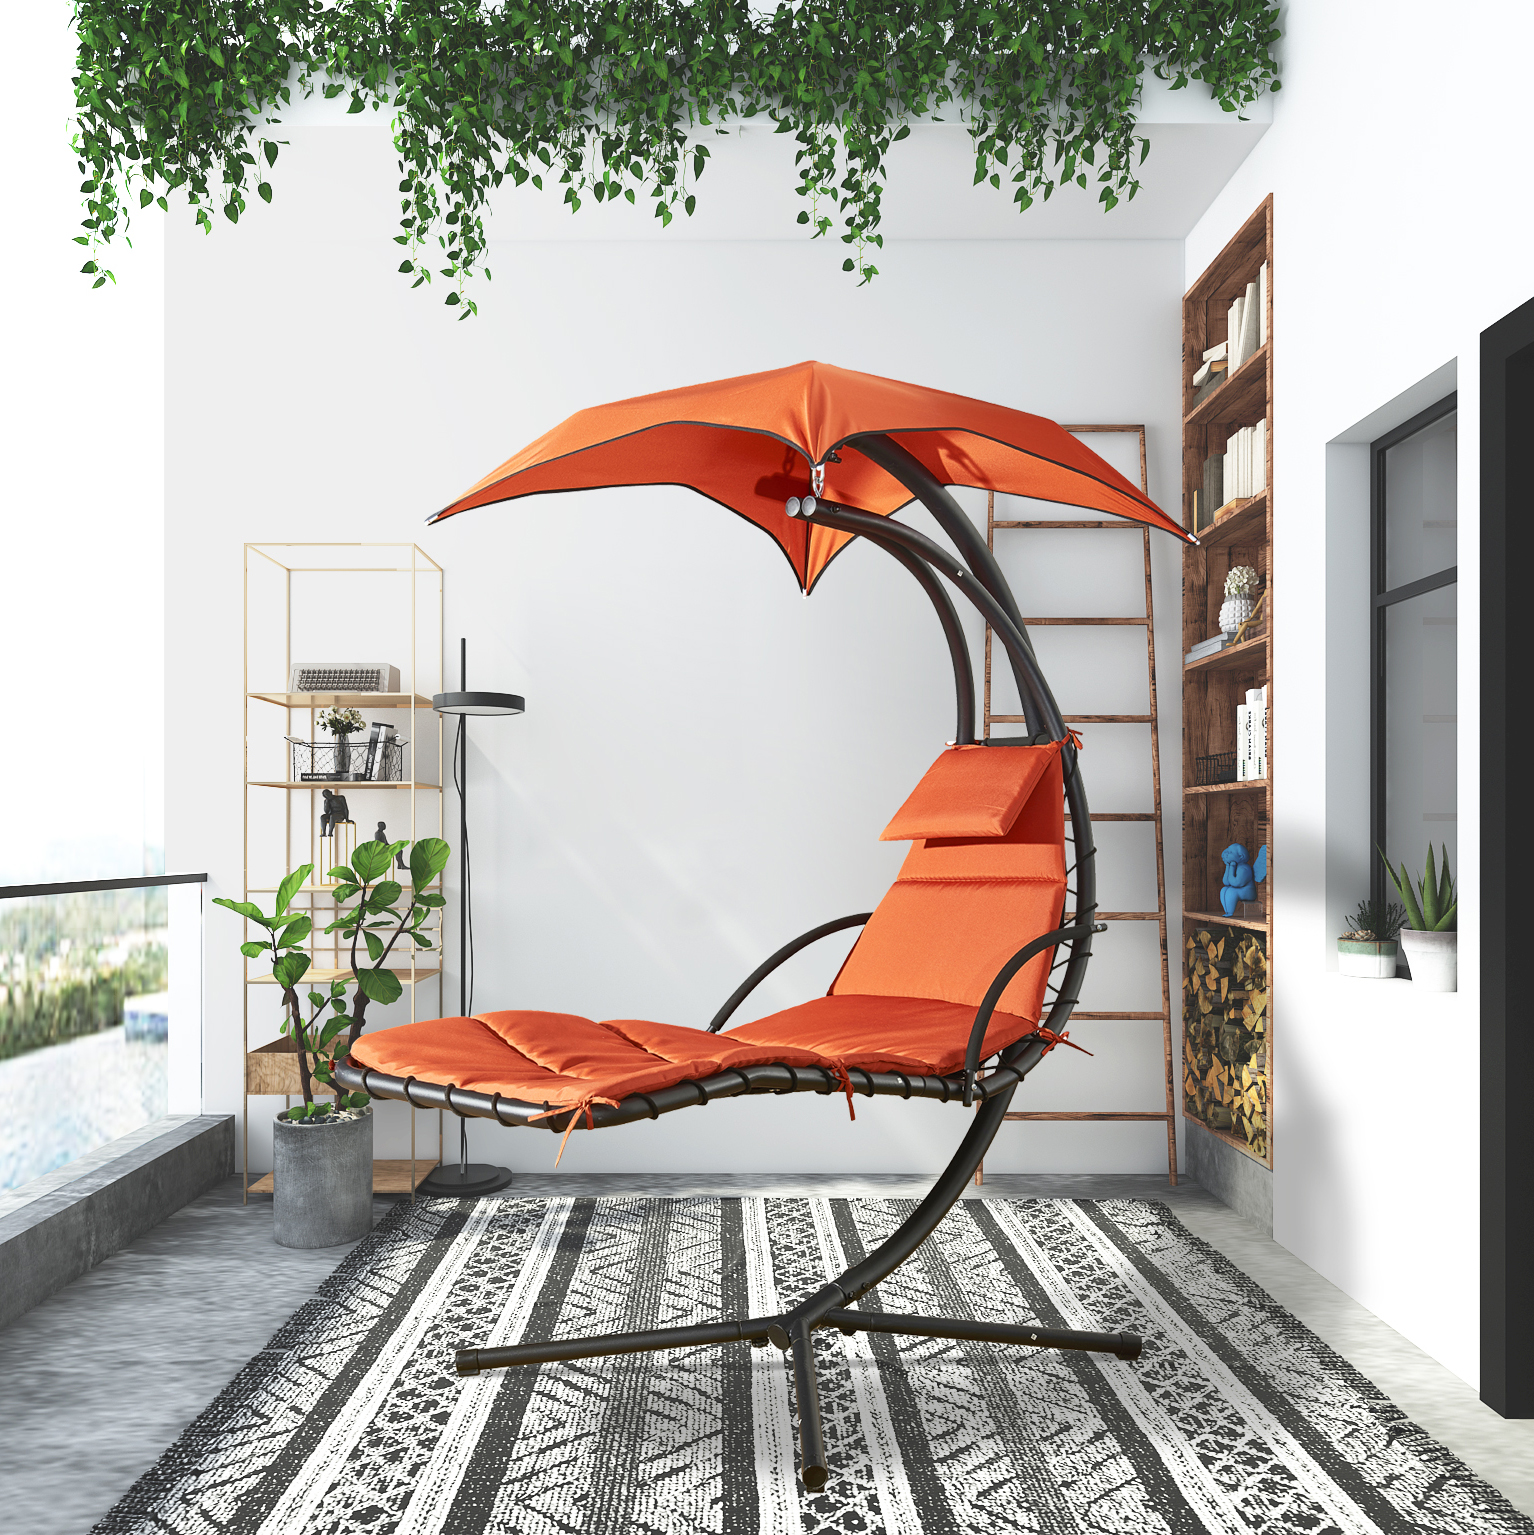 Finefind Hanging Chair Patio Chaise Lounge Hammock Floating Swing Chair Outdoor Orange Garden Deck and Poolside - image 1 of 7